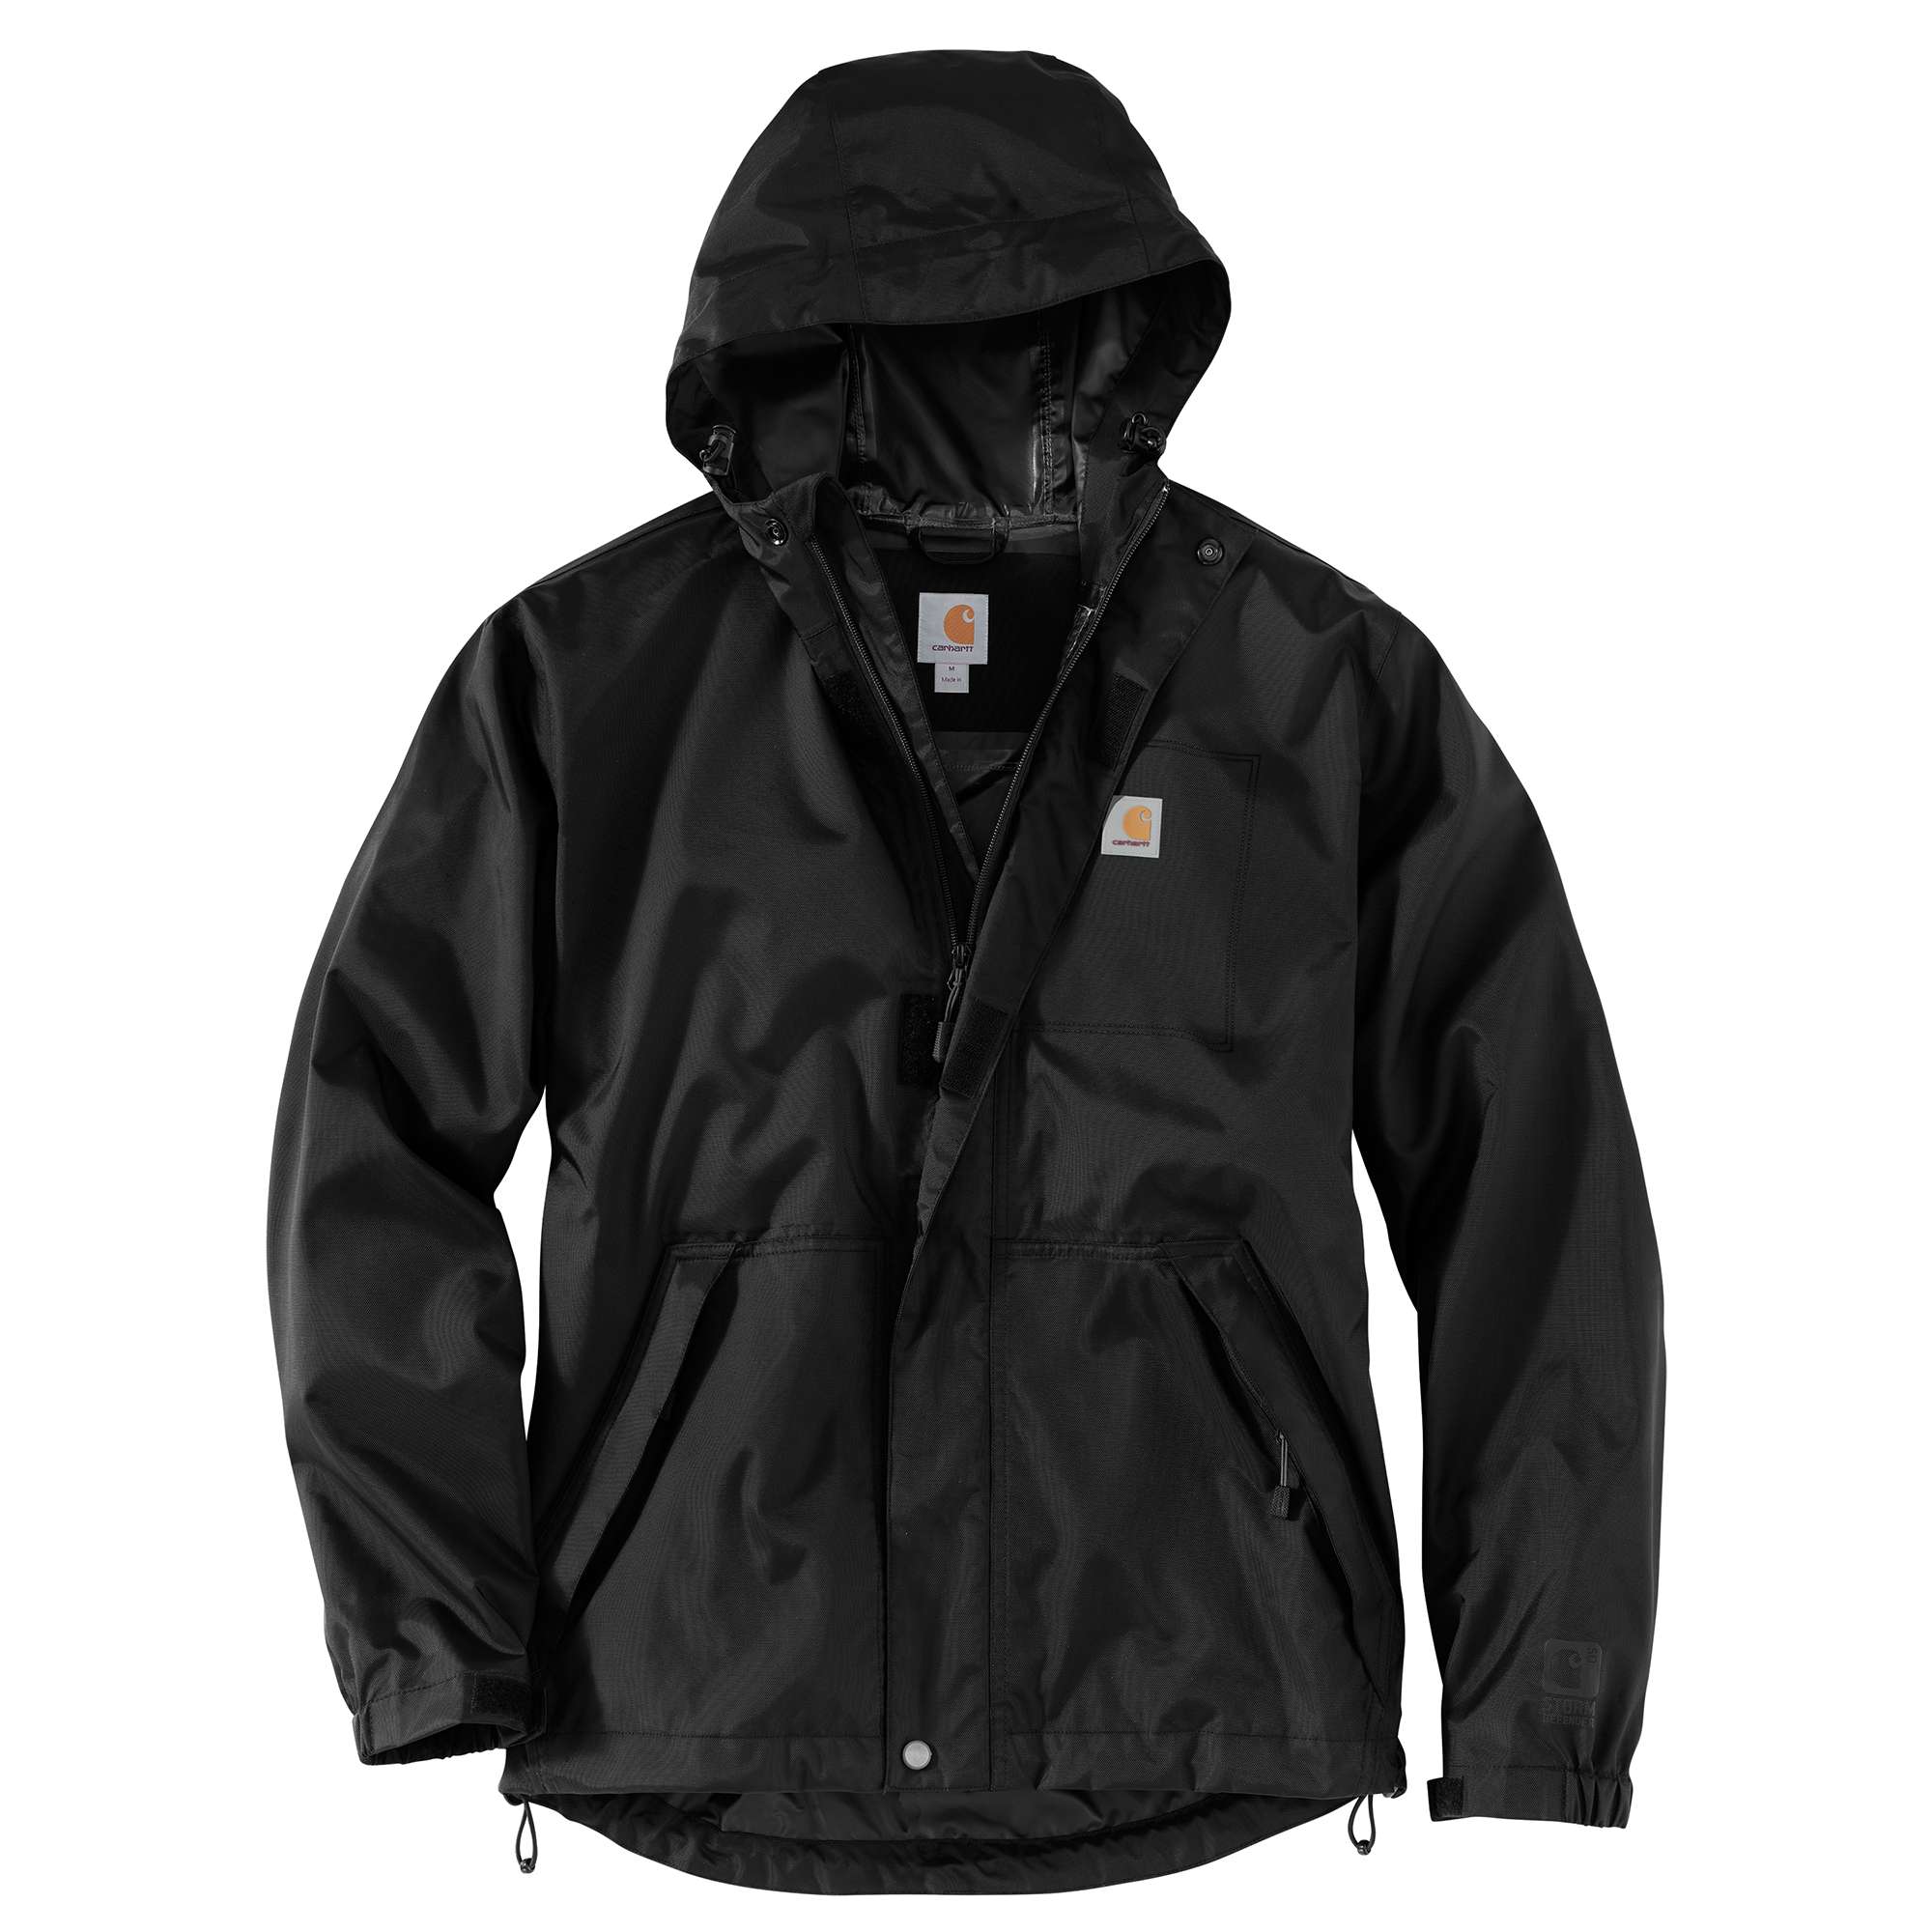 Storm Defender Loose FIt Midweight Jacket